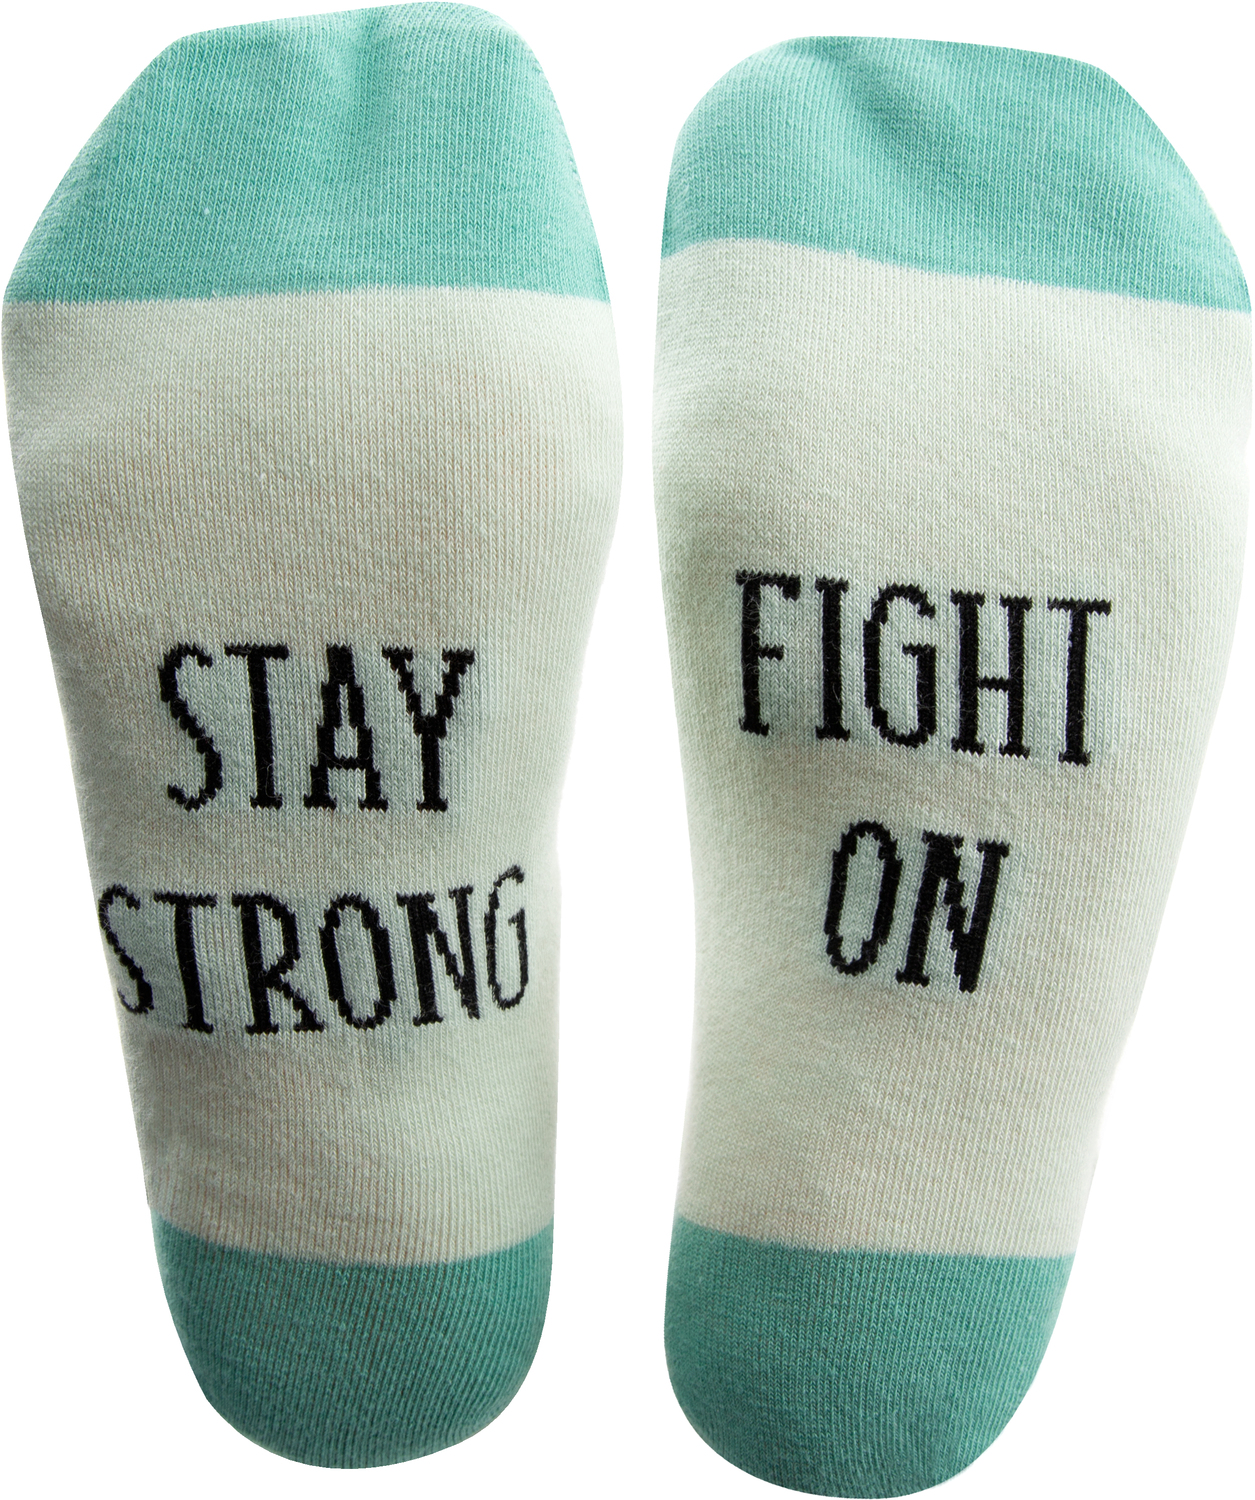 Stay Strong by Faith Hope and Healing - Stay Strong - S/M Unisex Sock